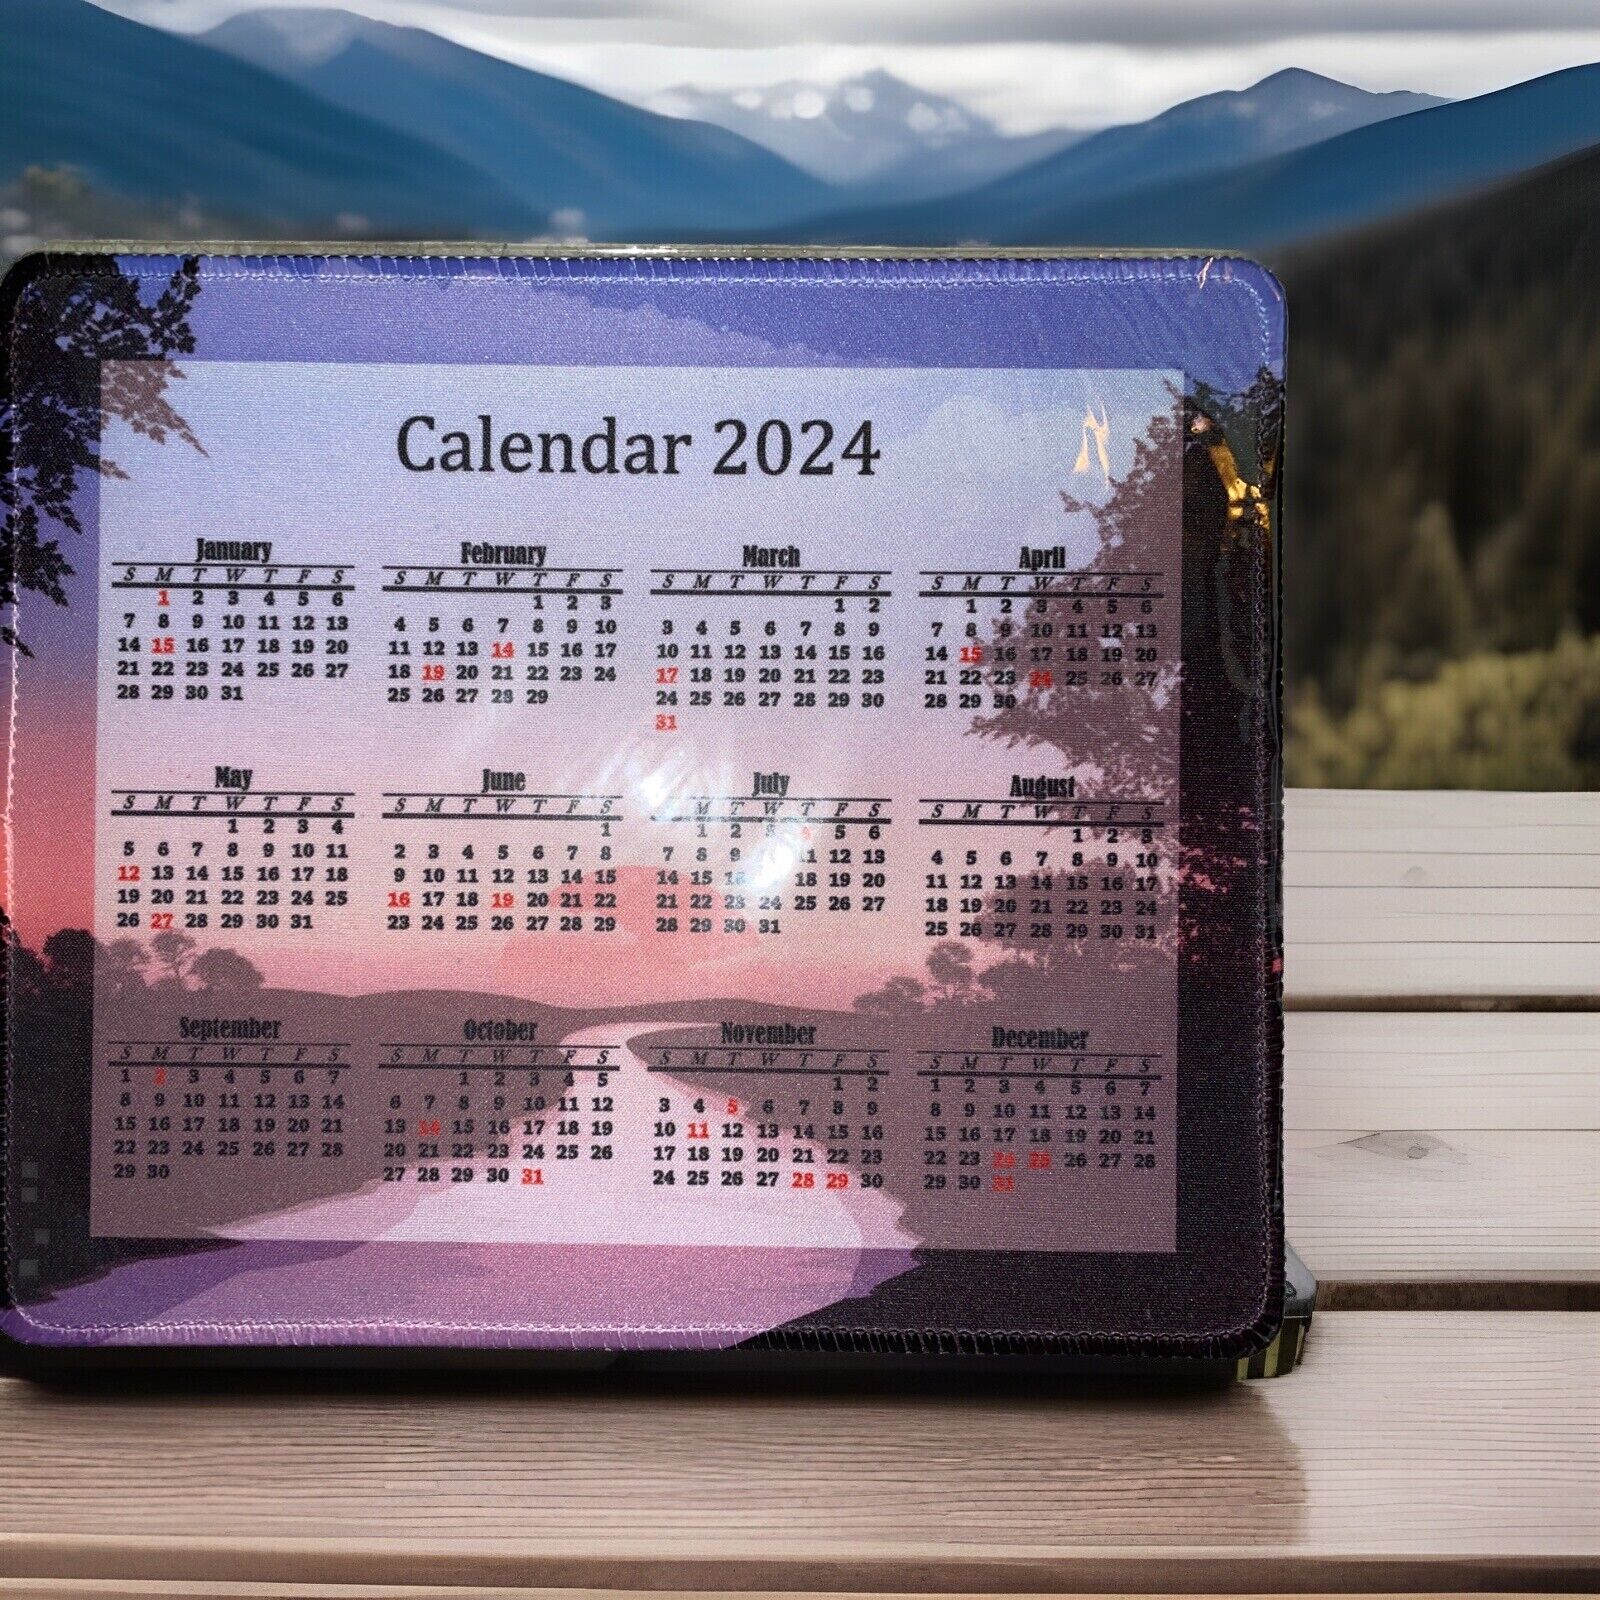 2024 Calendar Mouse Pad, Natural Rubber Mouse Pad, Quality Creative